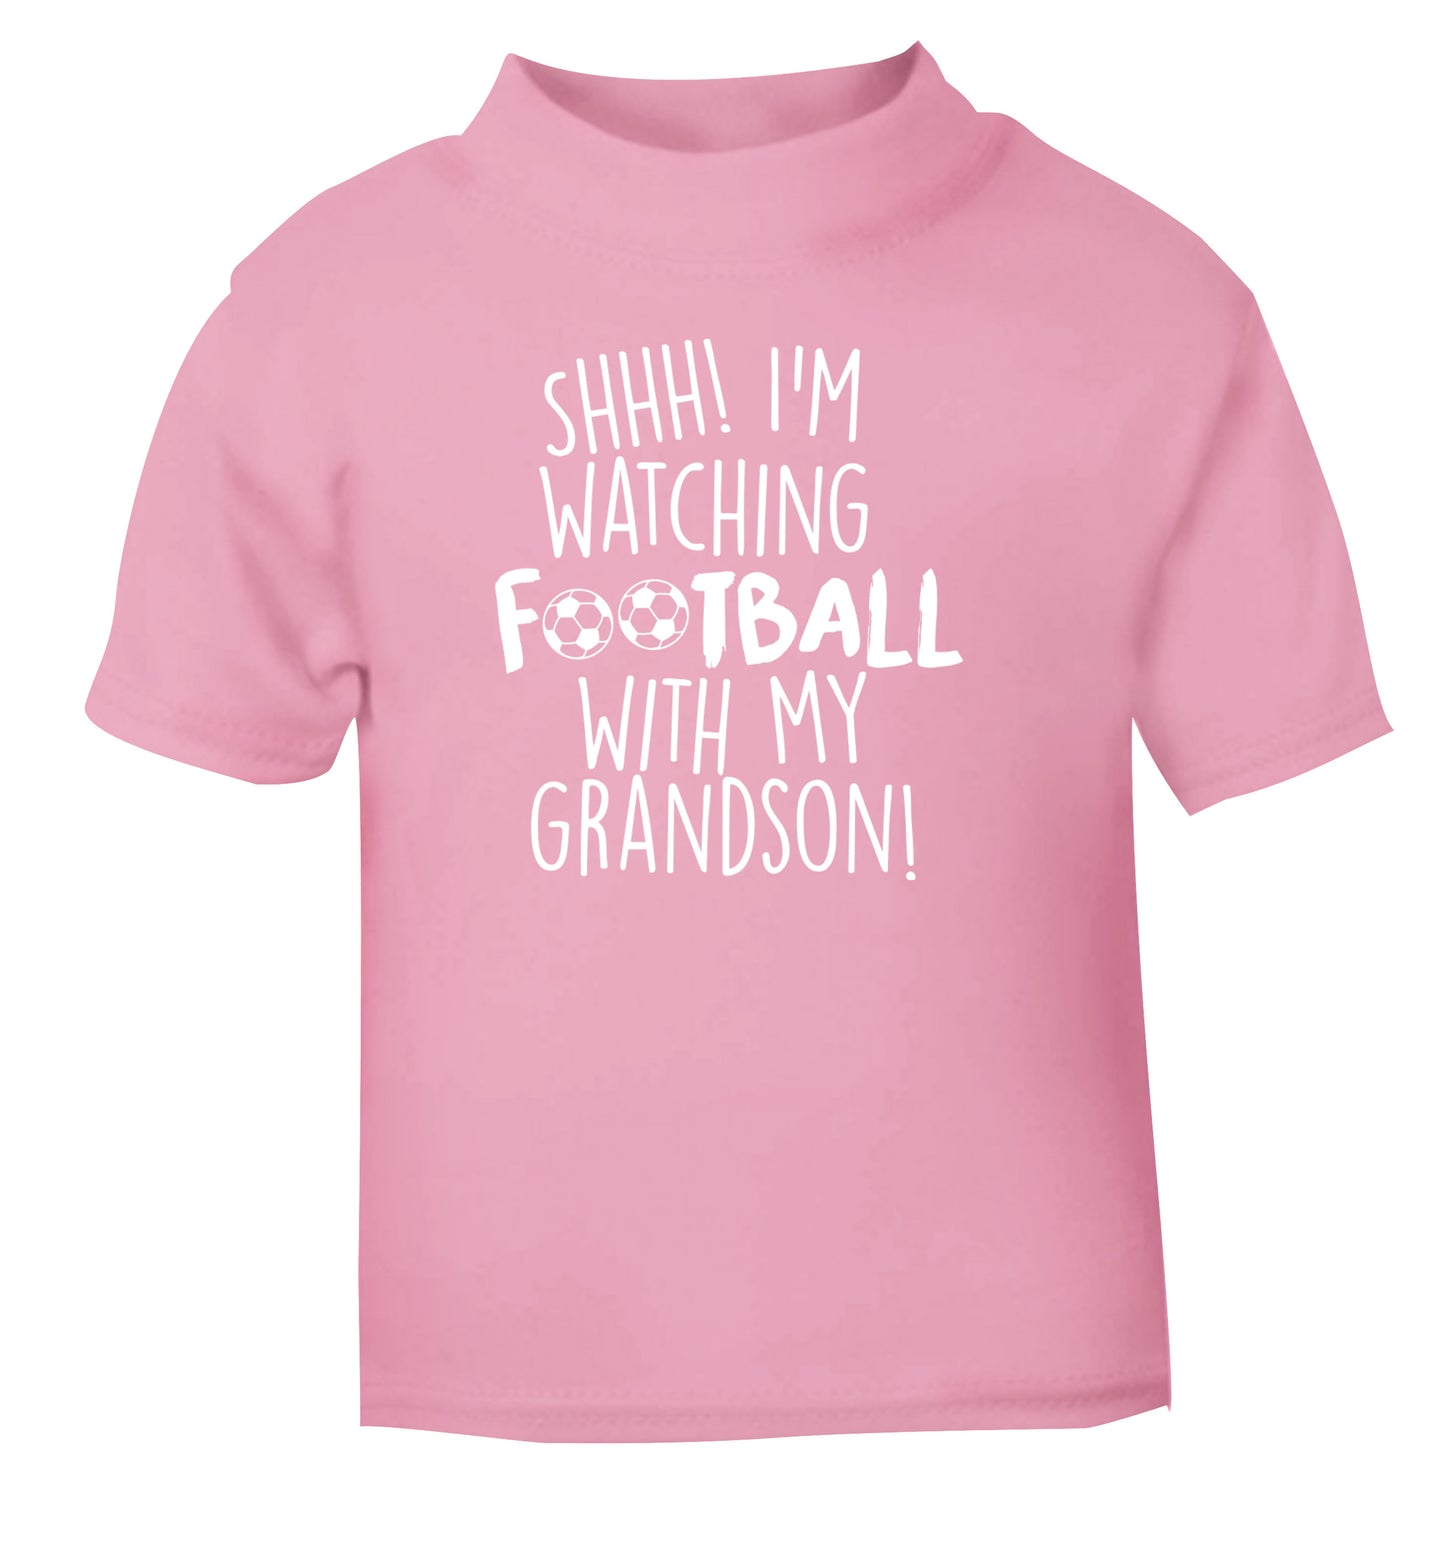 Shhh I'm watching football with my grandson light pink Baby Toddler Tshirt 2 Years